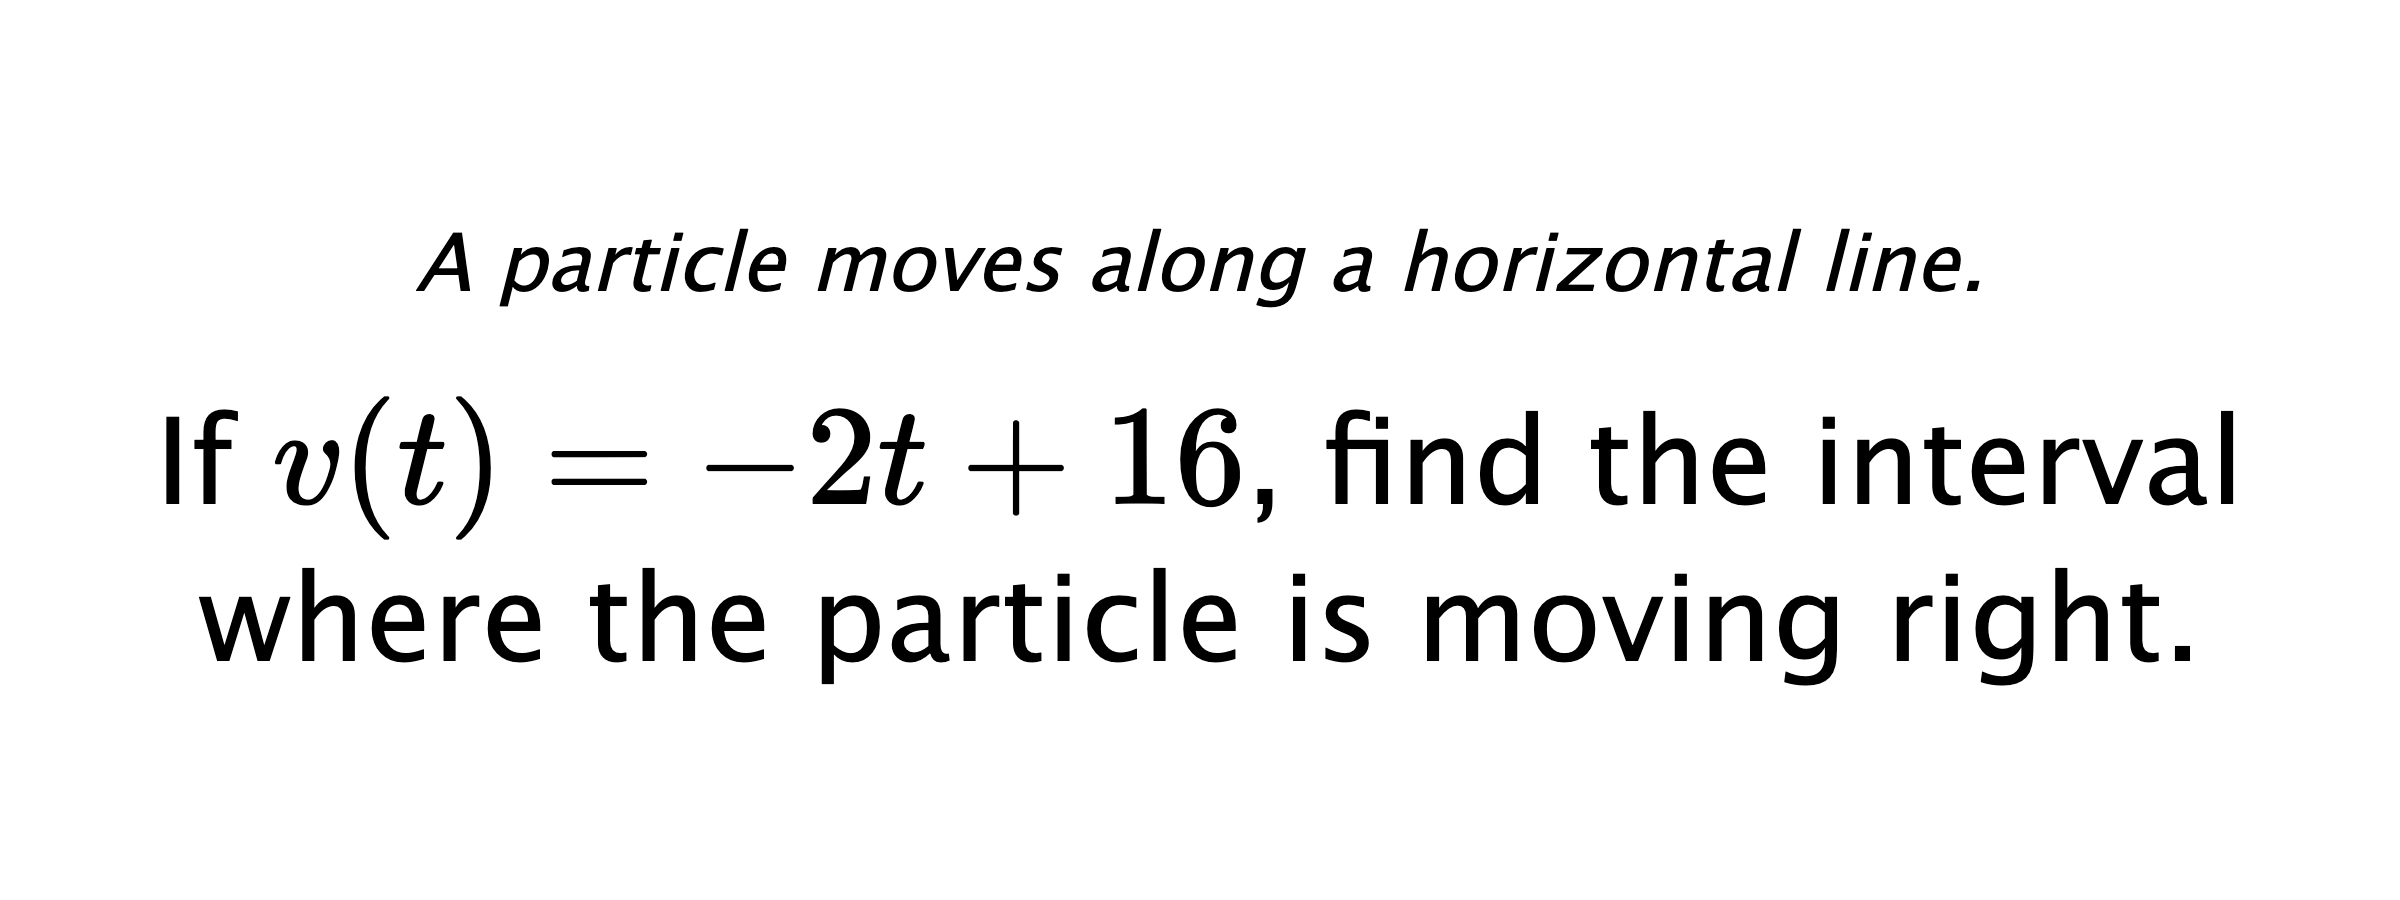 A particle moves along a horizontal line. If $ v(t)=-2t+16 $, find the interval where the particle is moving right.